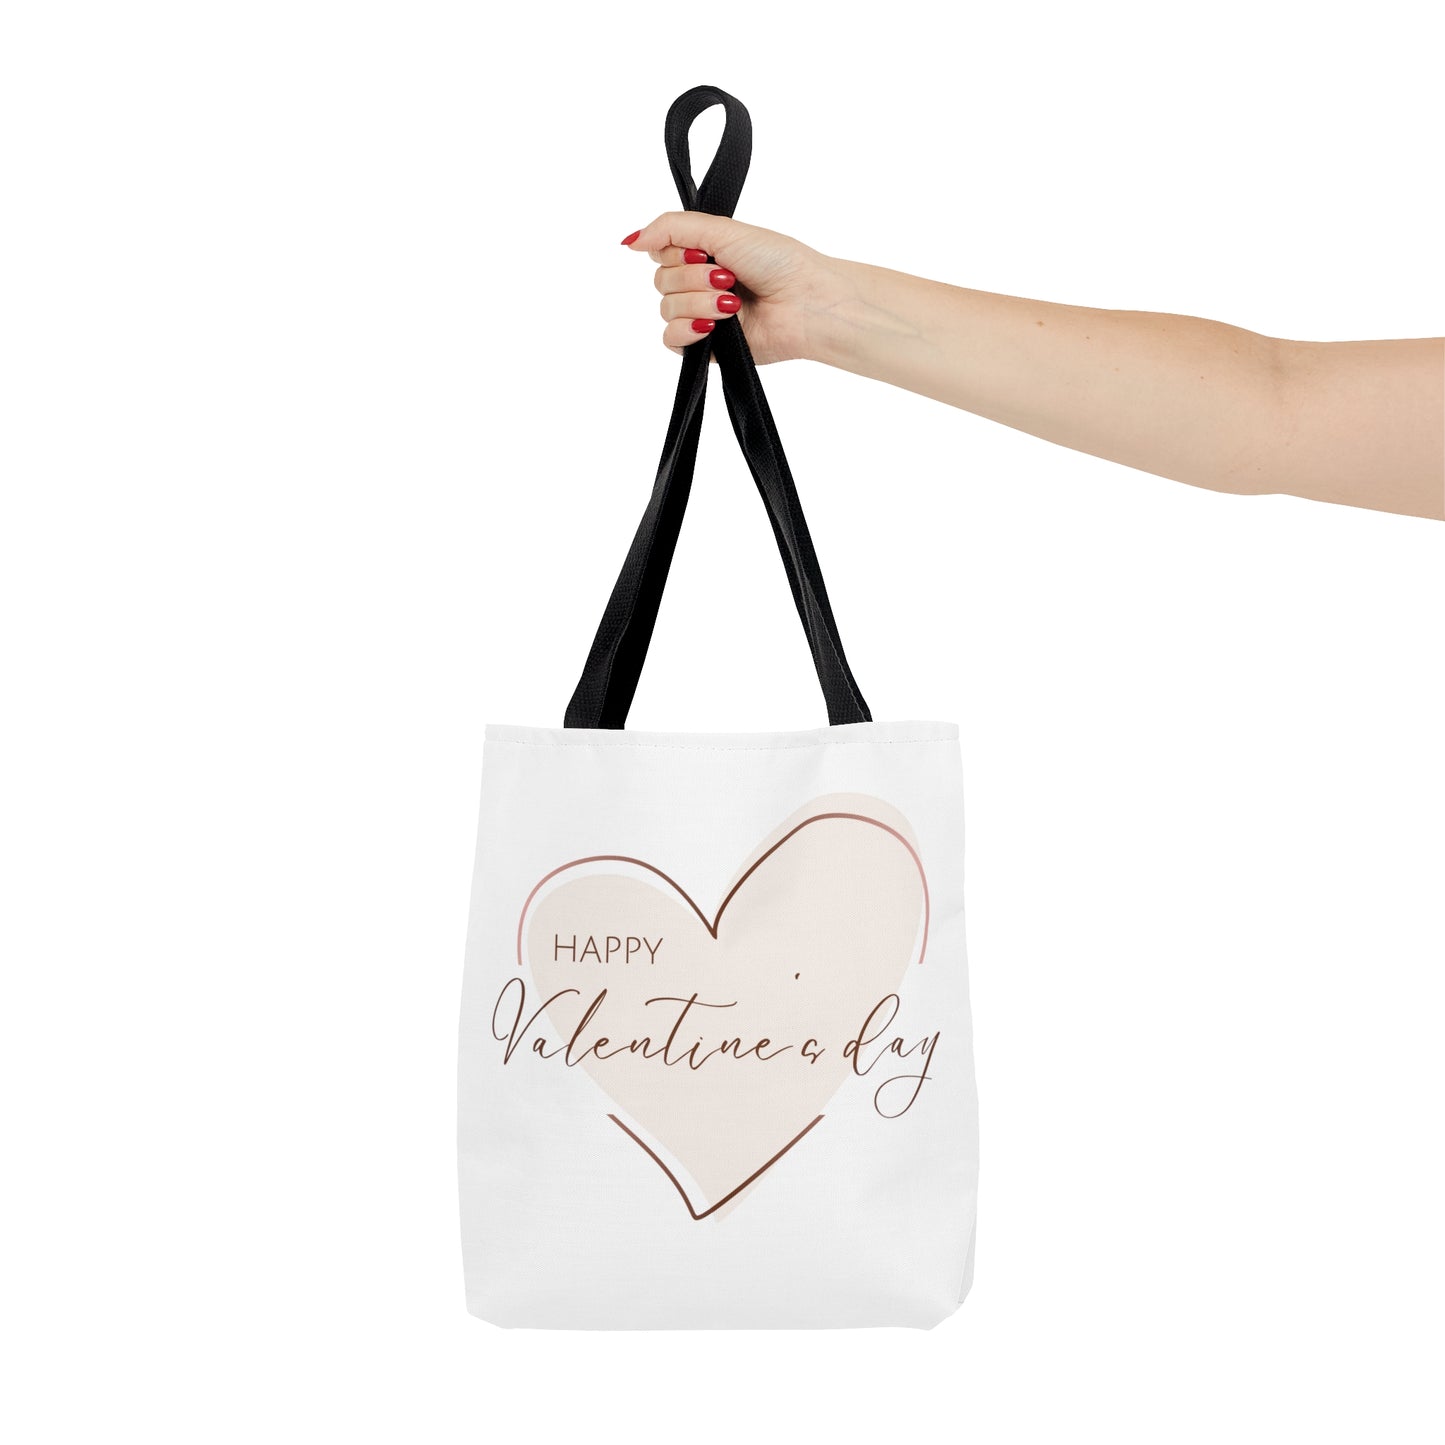 Happy Valentine's Day inside Heart Printed Tote Bag, Reusable Tote Bag for Valentine